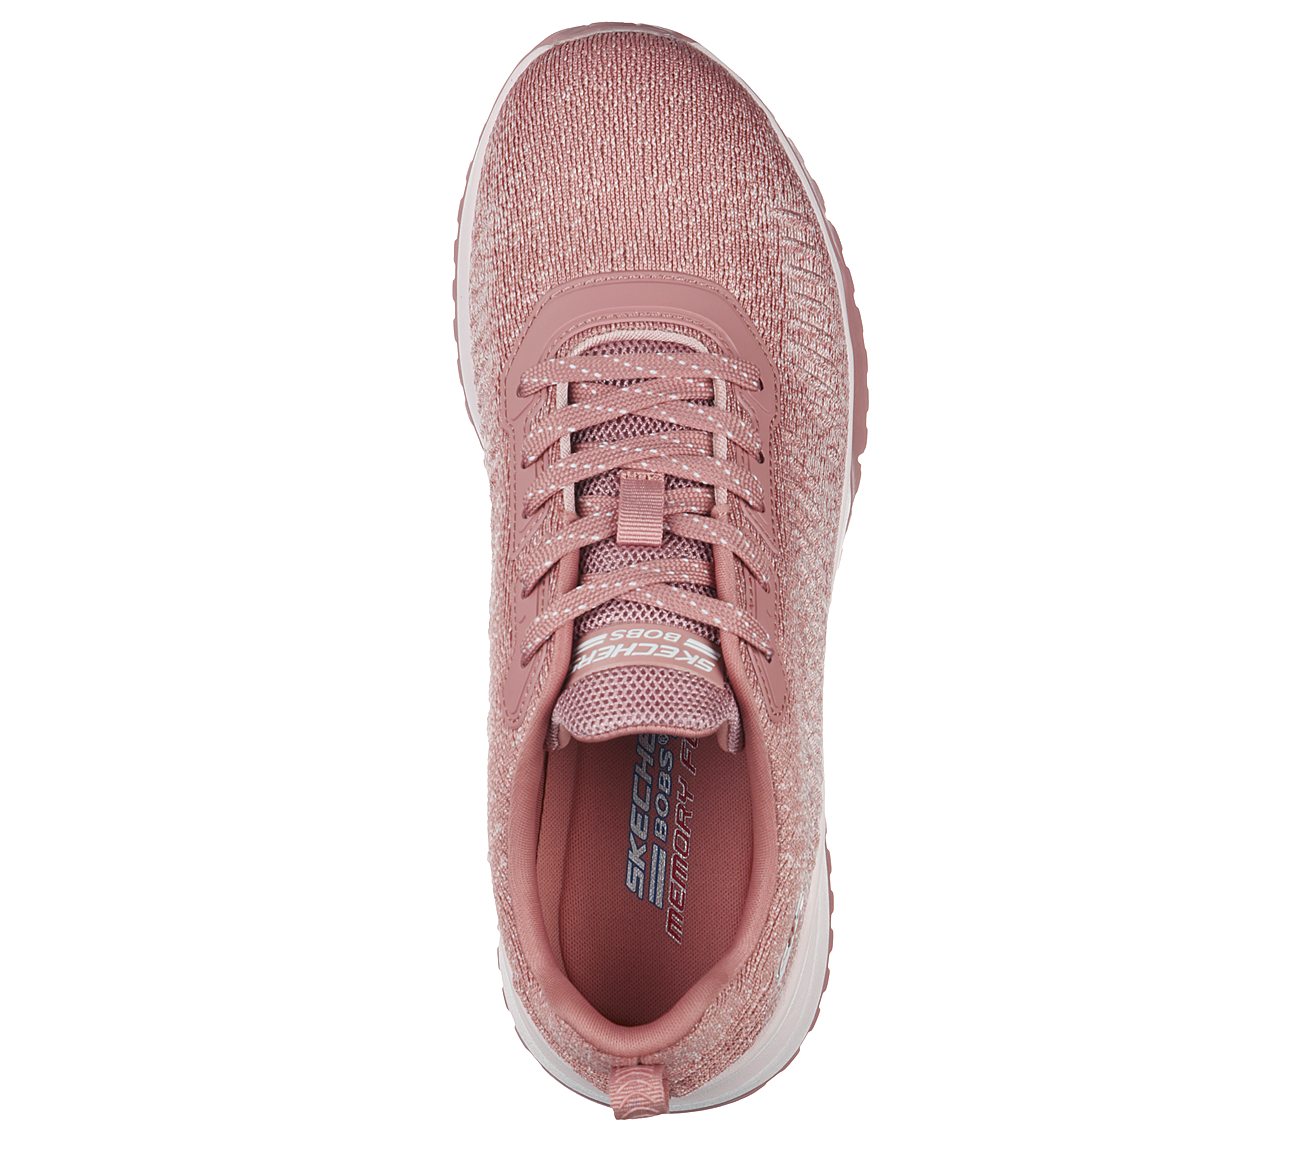 BOBS SQUAD3-ADVENTURE UNKNOWN, BLUSH Footwear Top View